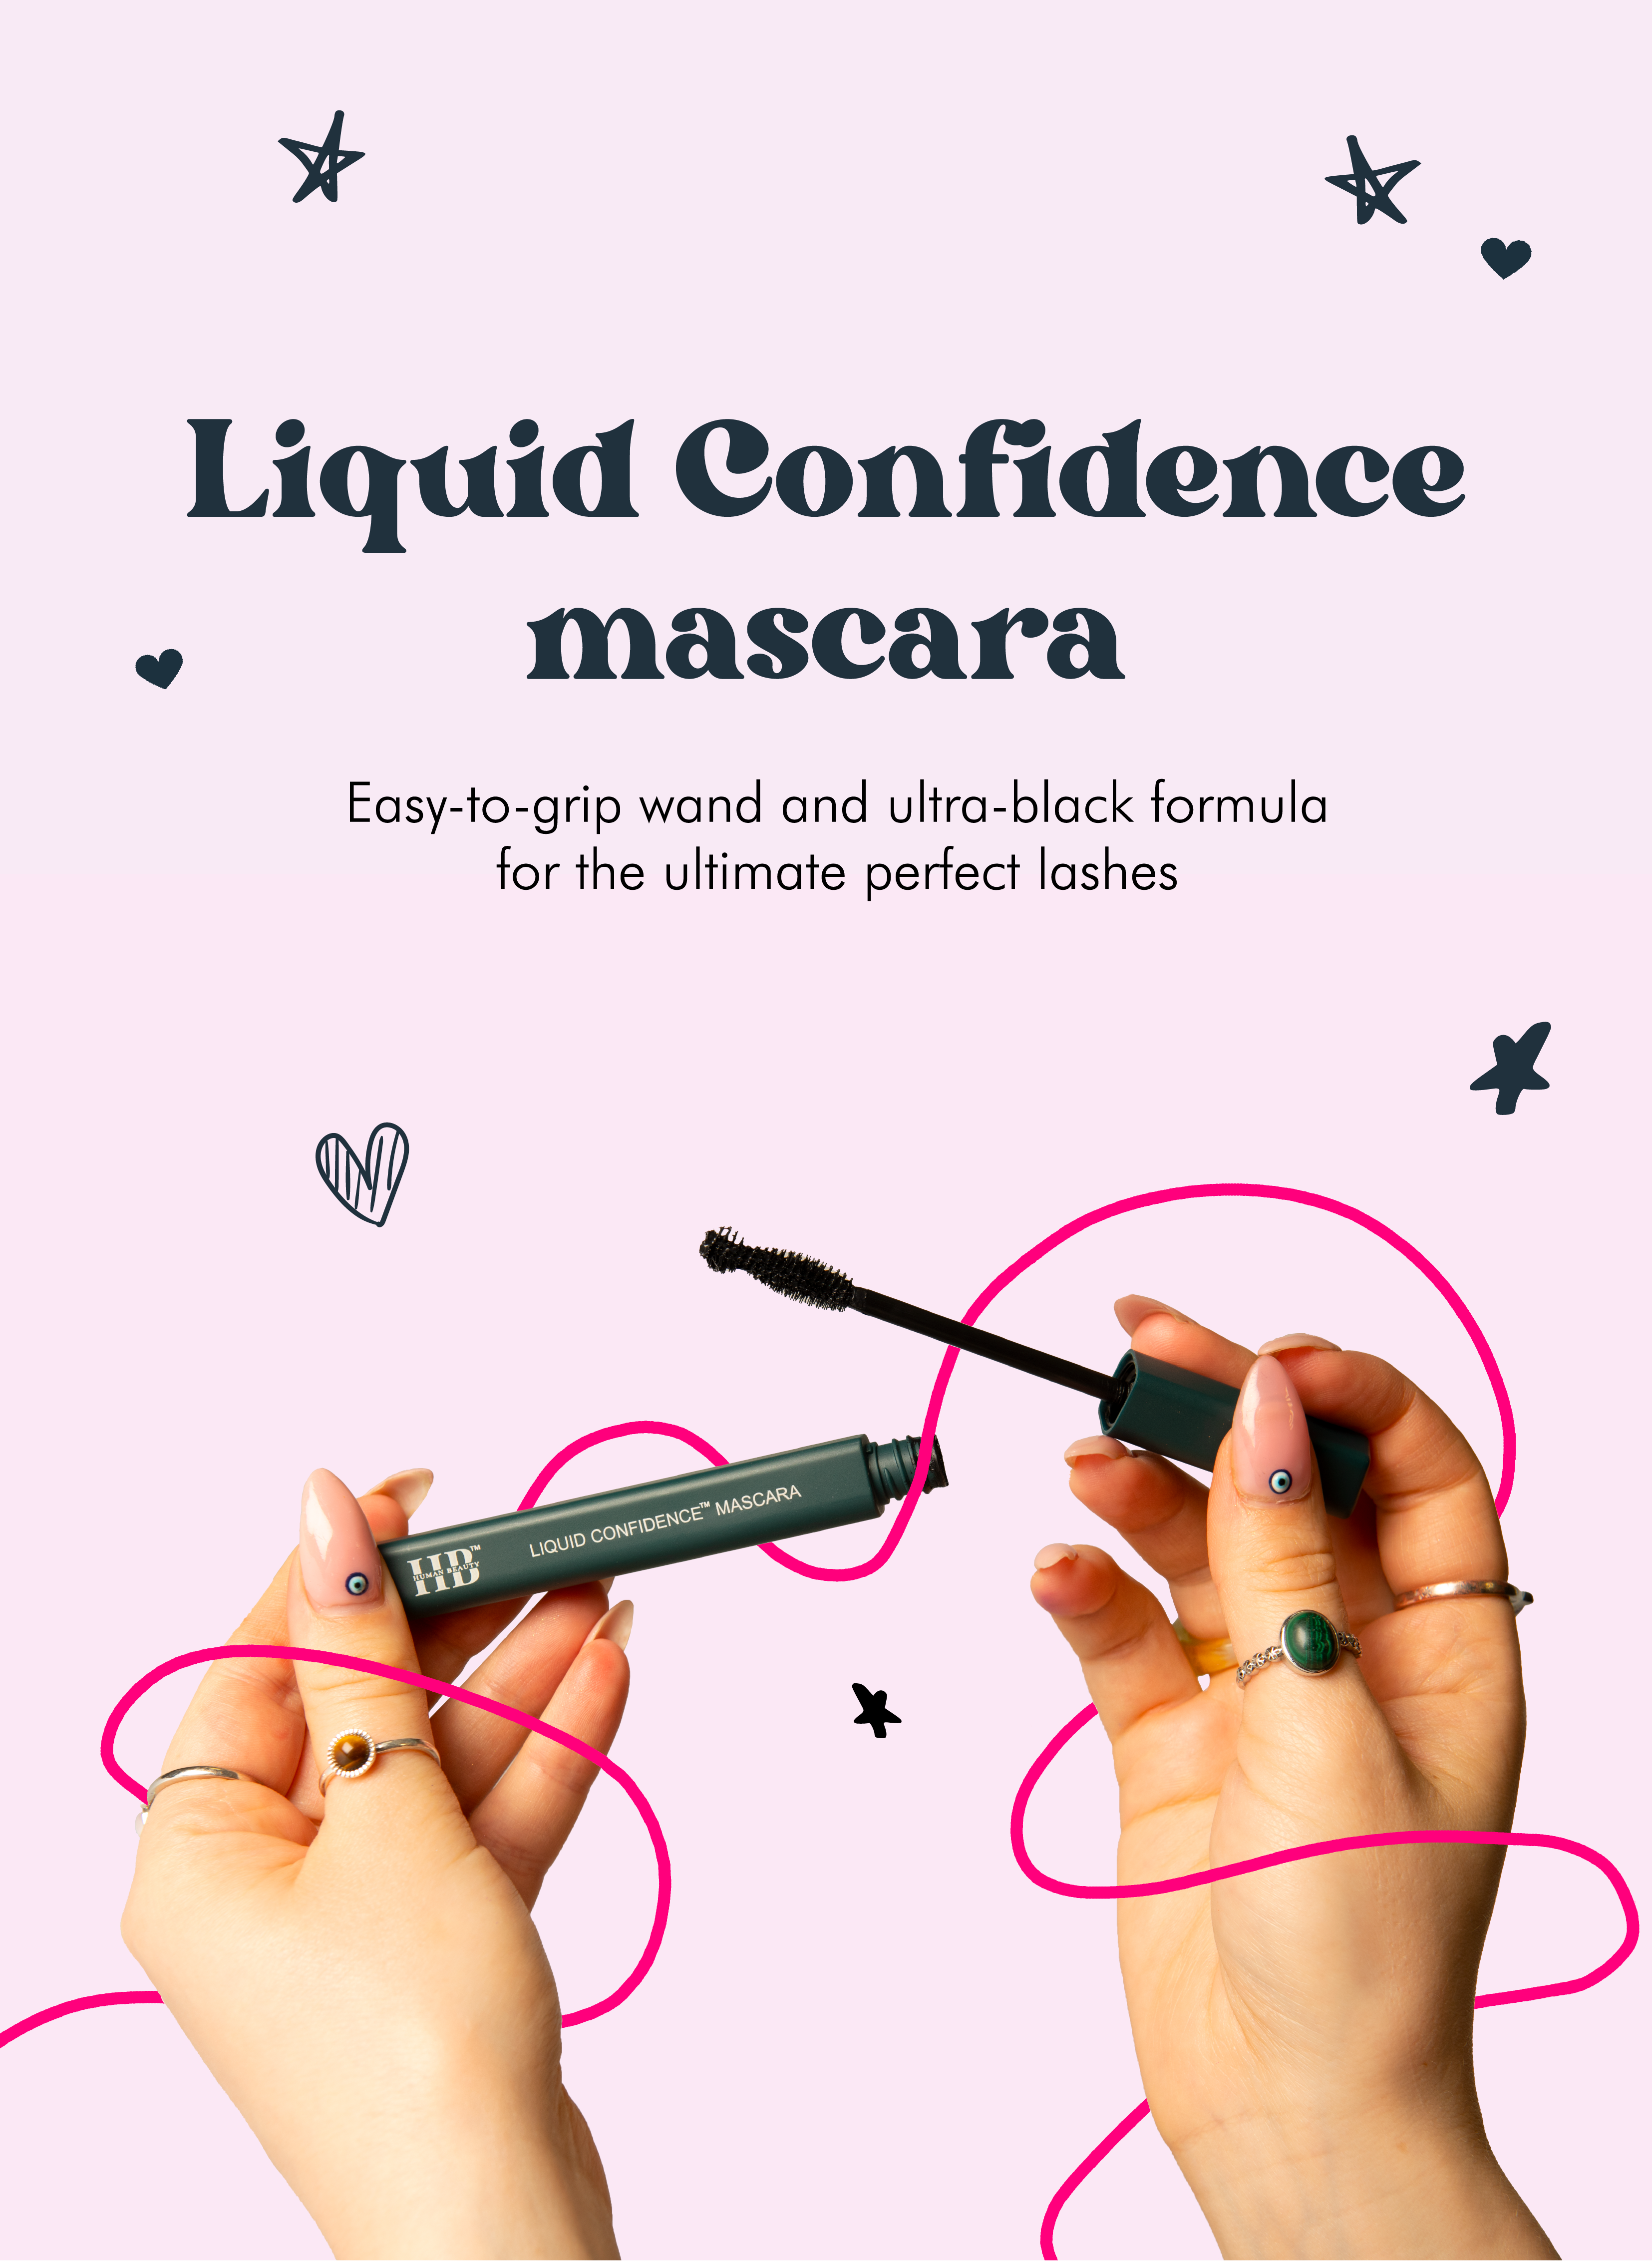 Large visual of the Liquid Confidence mascara being held open by two hands on a light purple background. A text reads "Liquid Confidence Mascara. Easy-to-grip wand and ultra-black formula for the ultimate perfect lashes".